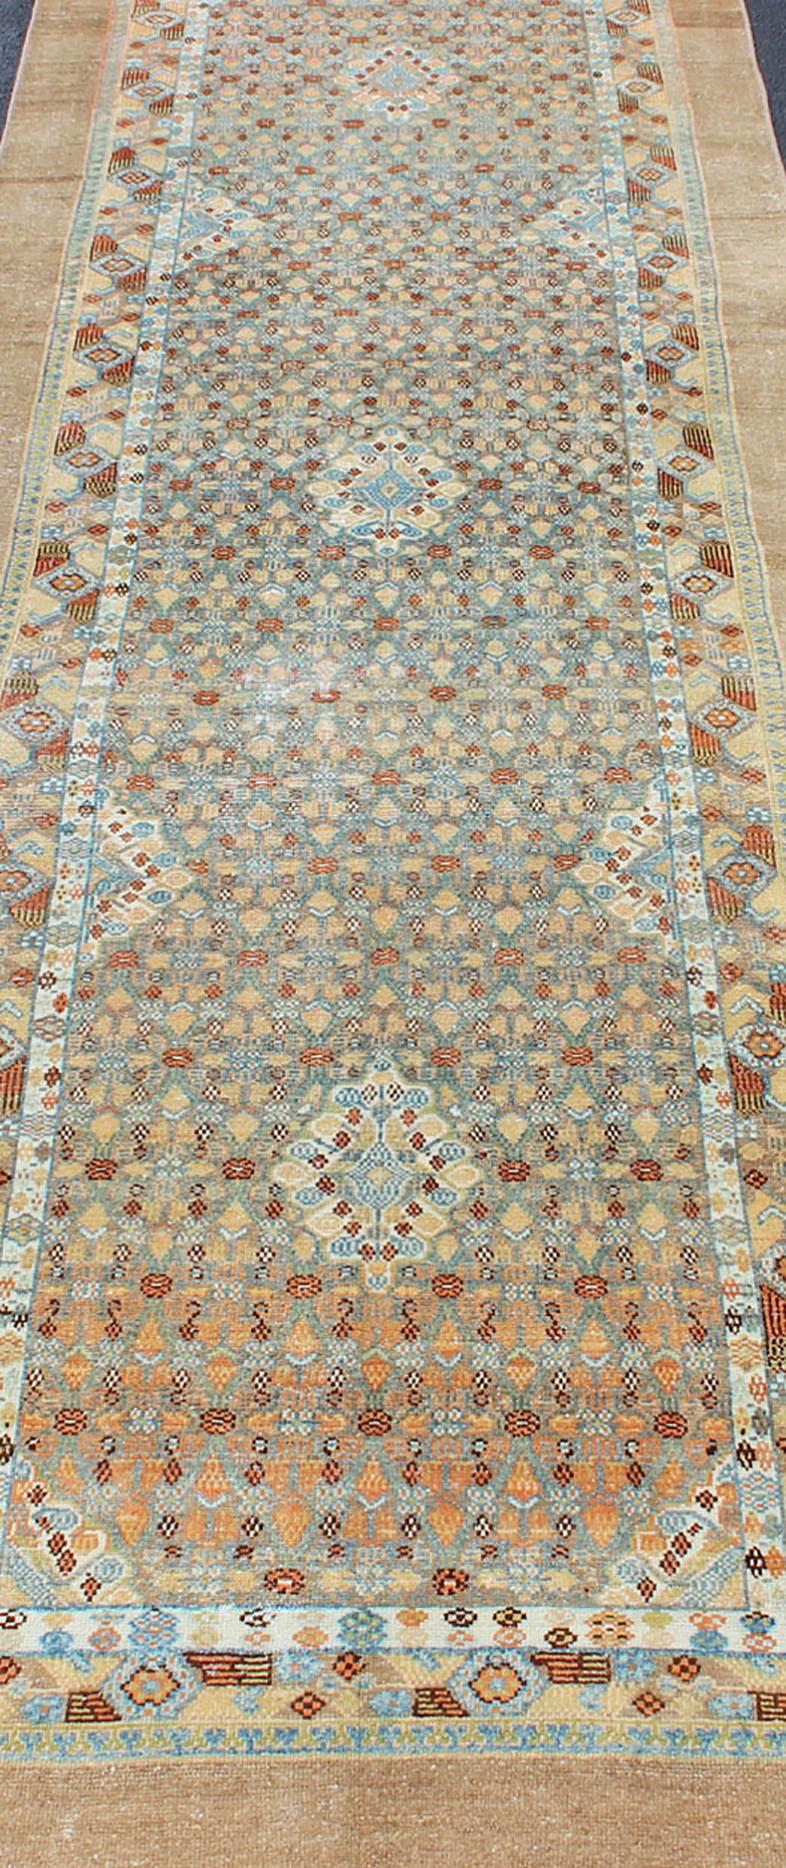 Antique Persian Camel Hair Serab Runner with Geometric Design in Light Colors For Sale 6